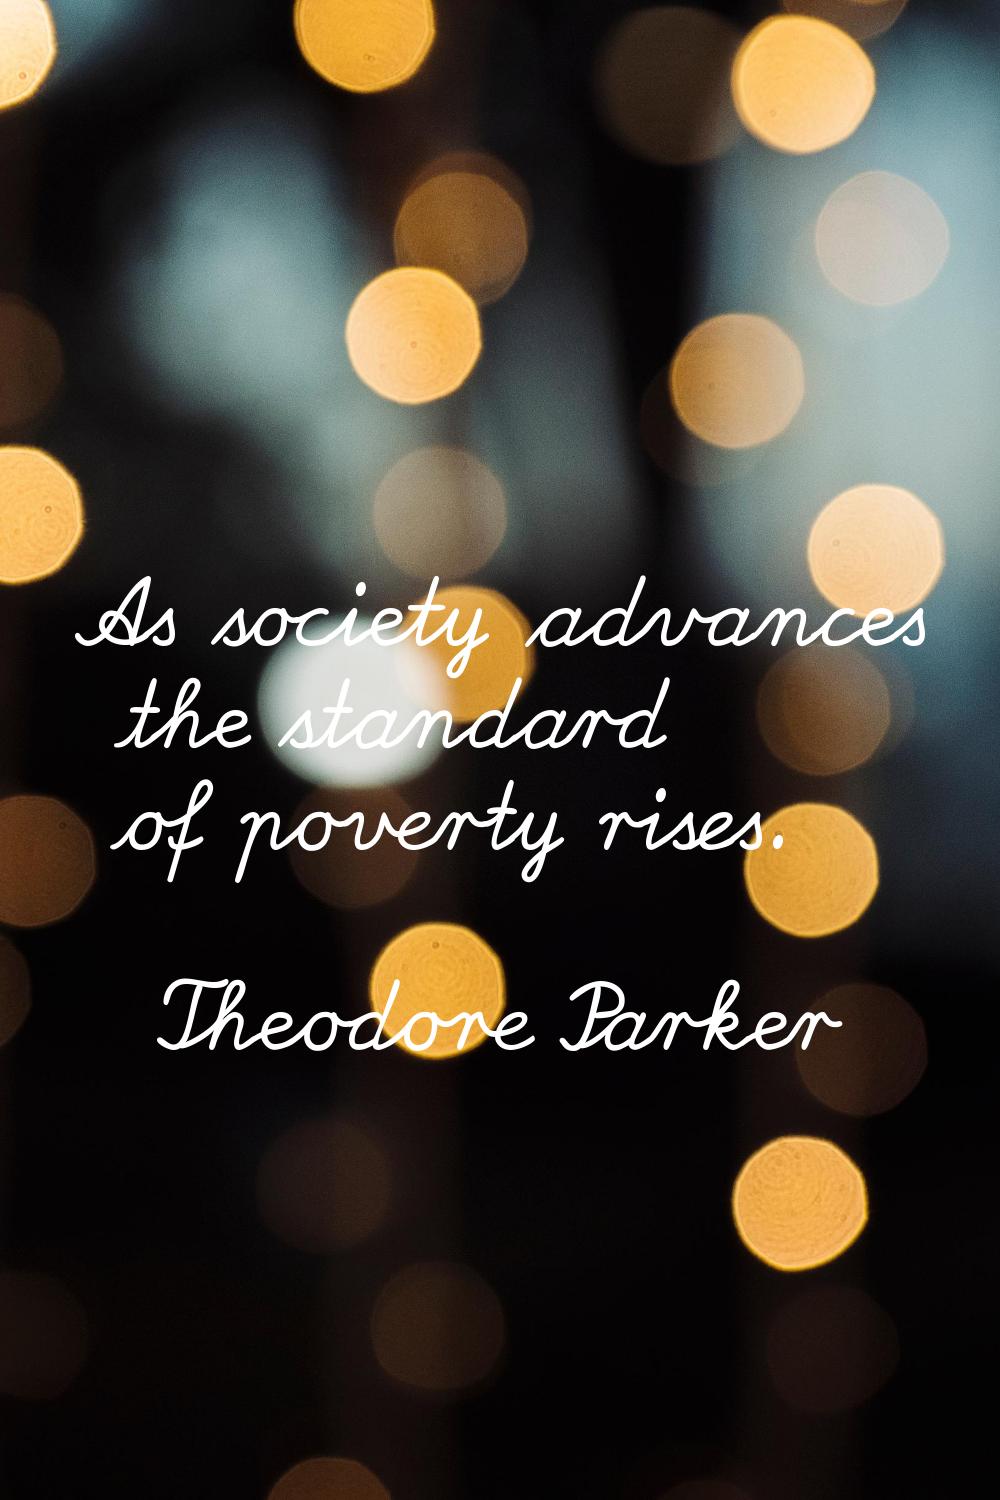 As society advances the standard of poverty rises.